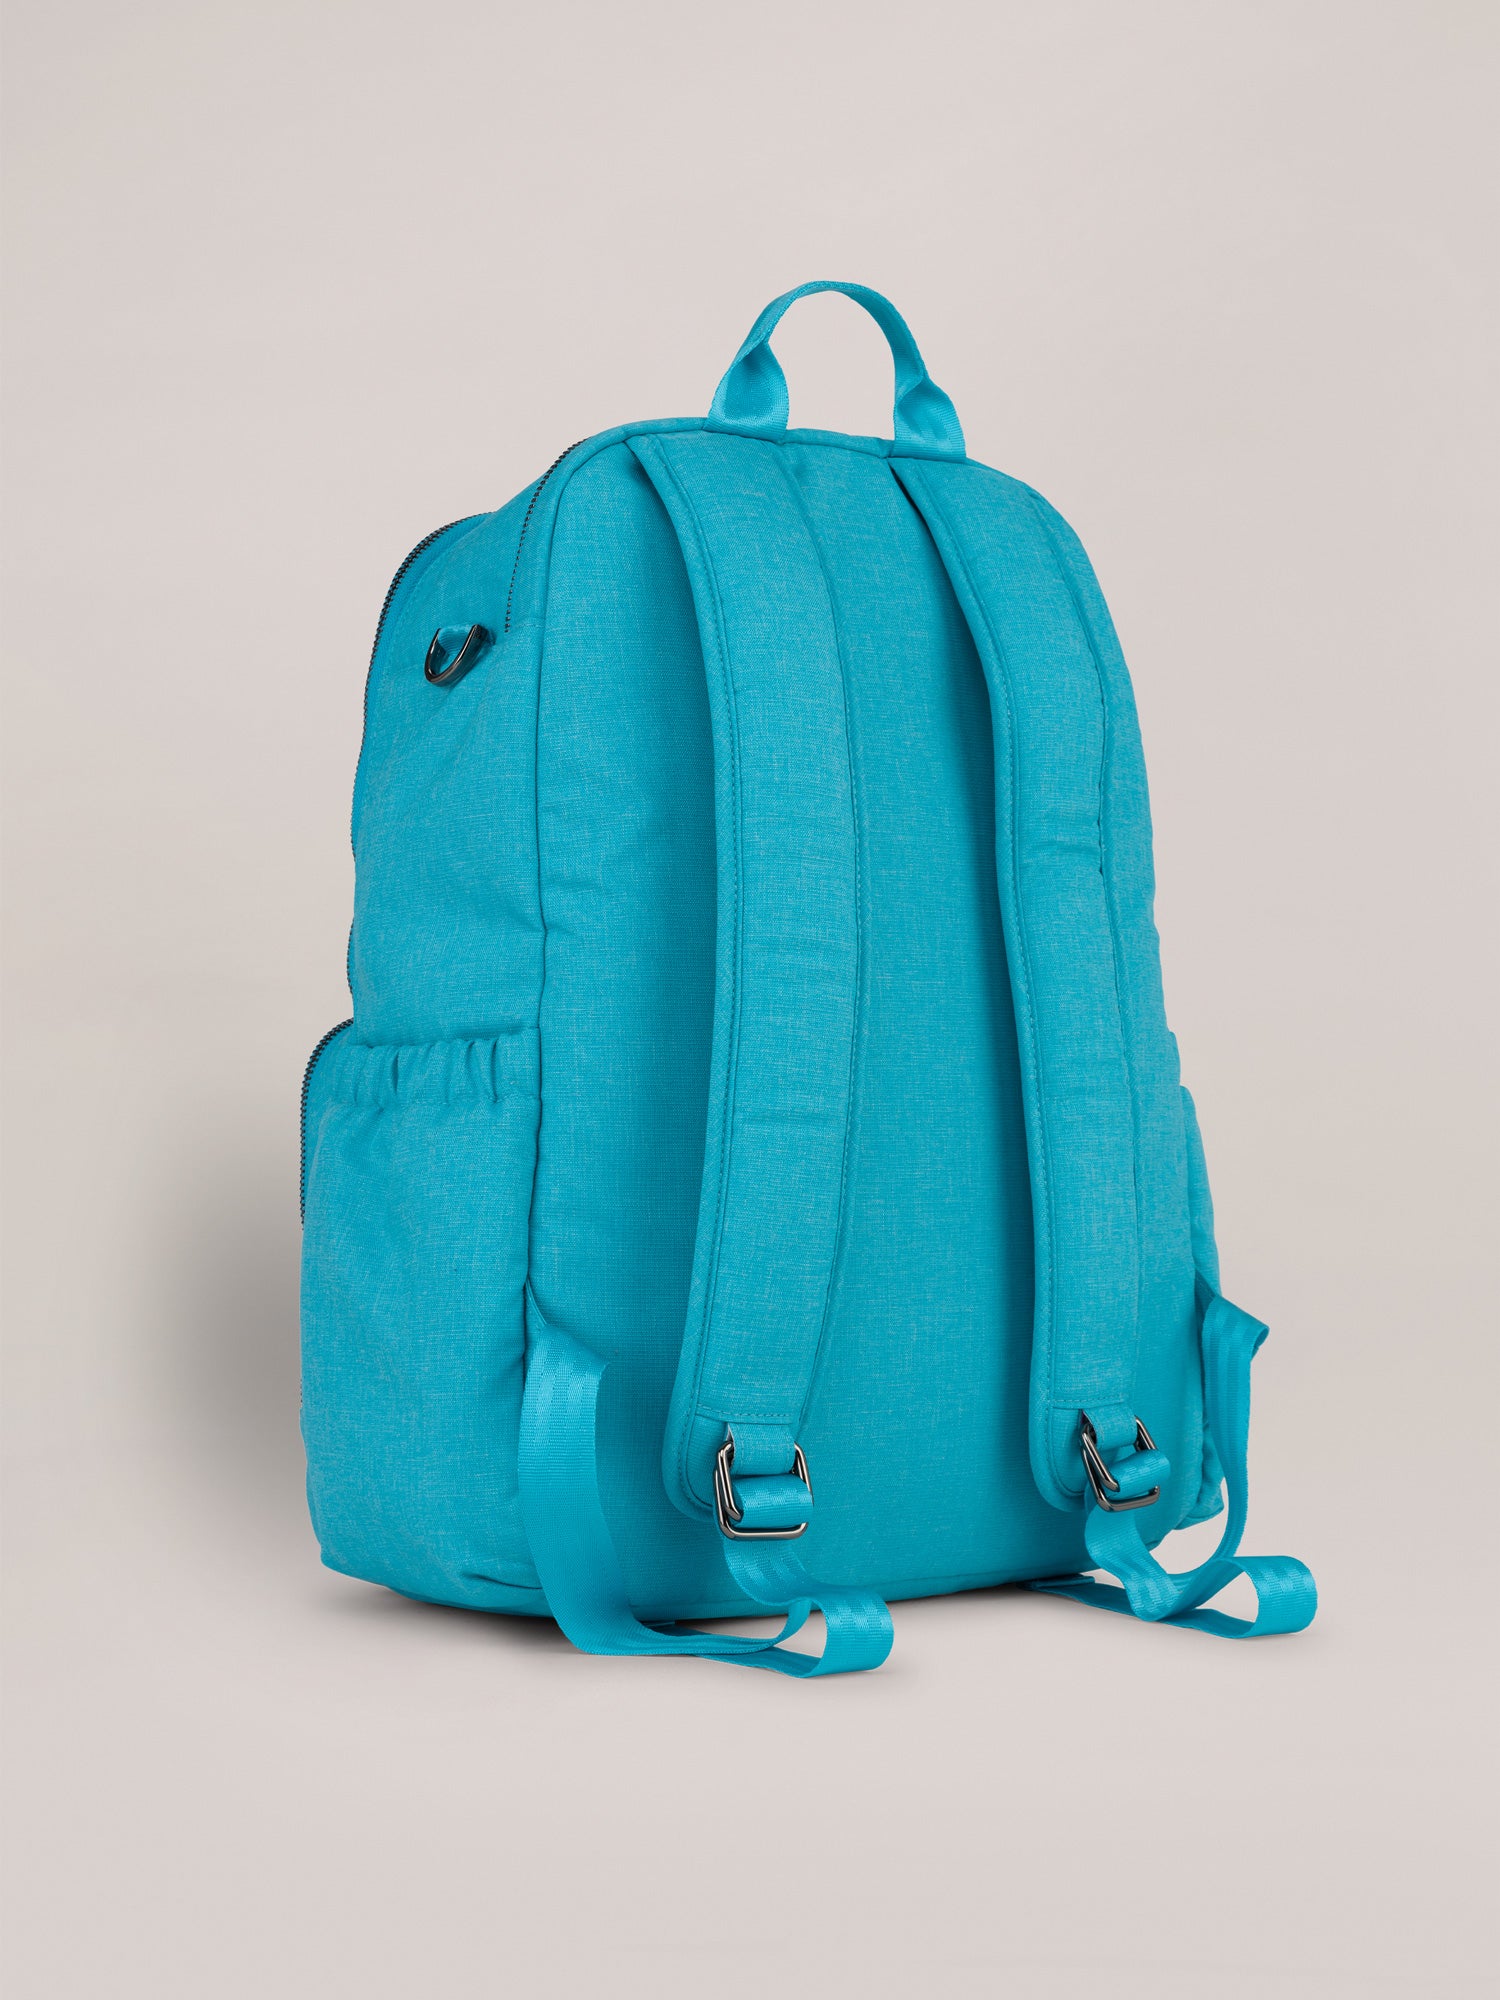 Bright Blue Zealous Backpack Quarter Angle Back View